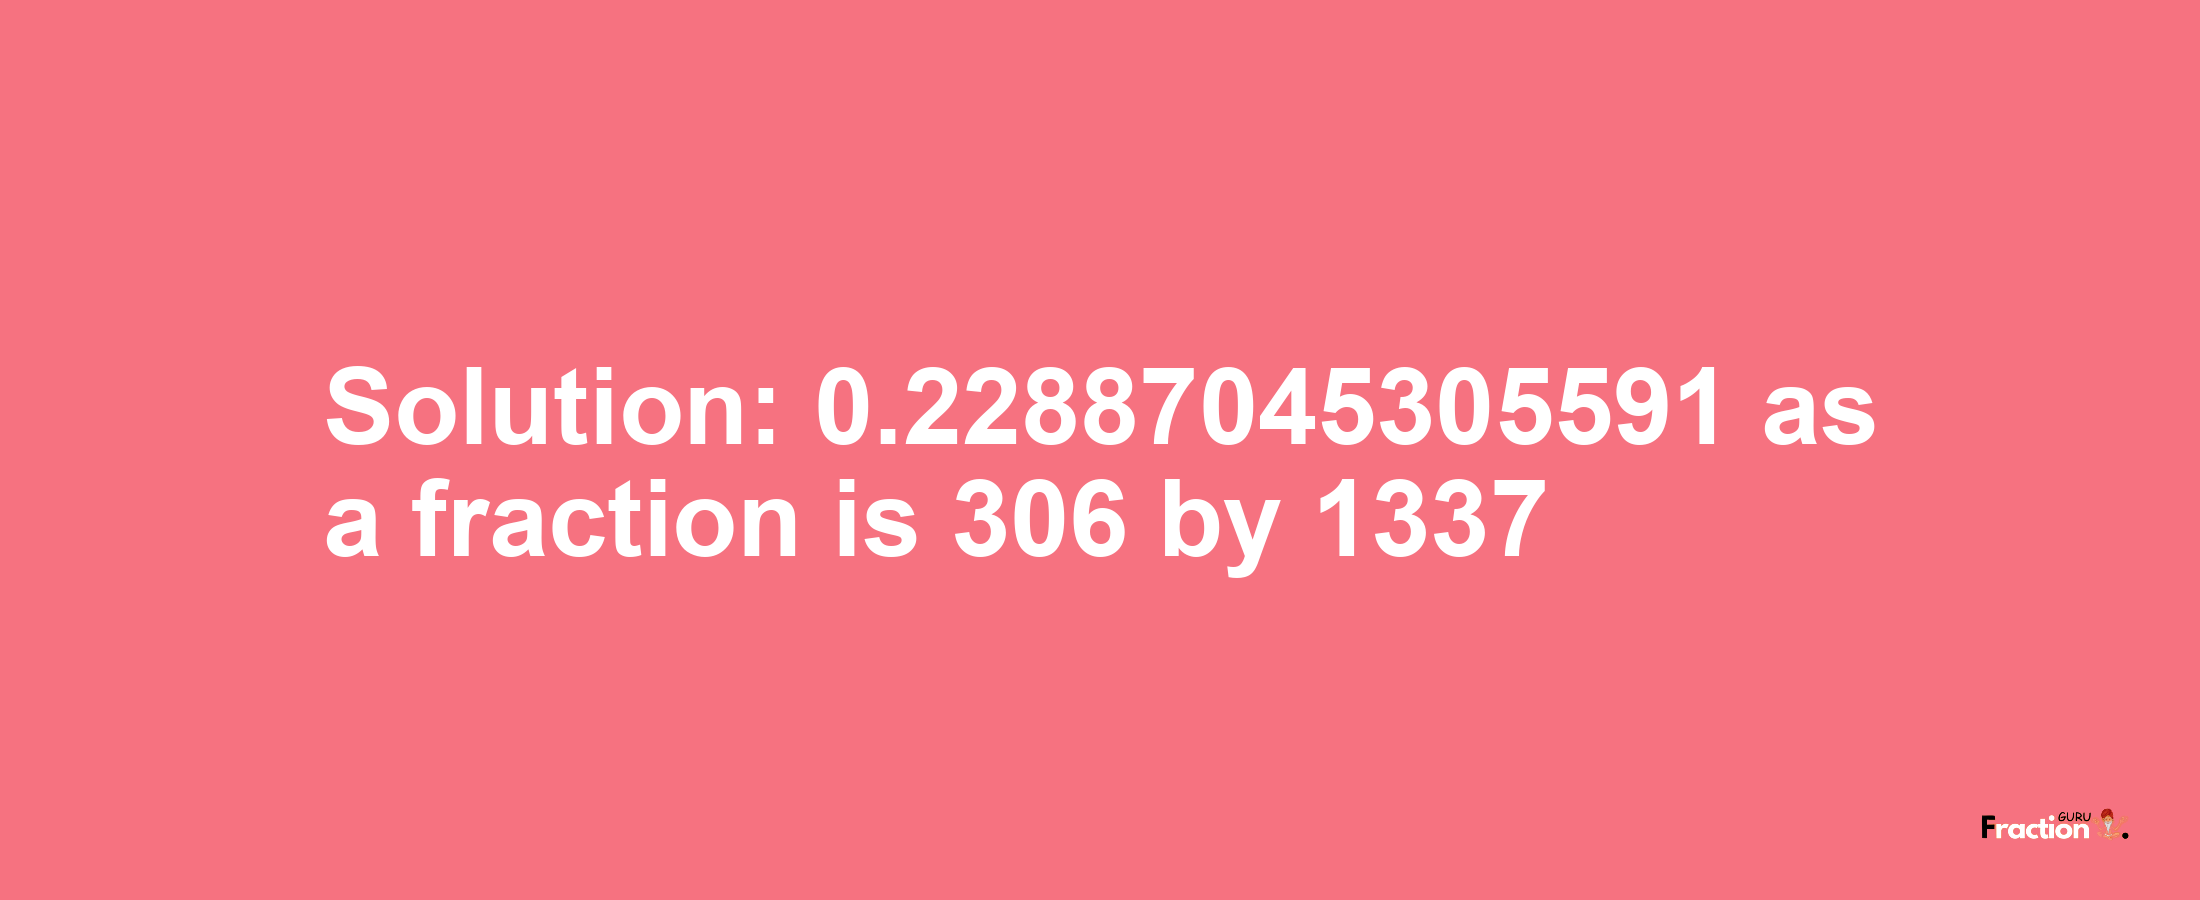 Solution:0.22887045305591 as a fraction is 306/1337